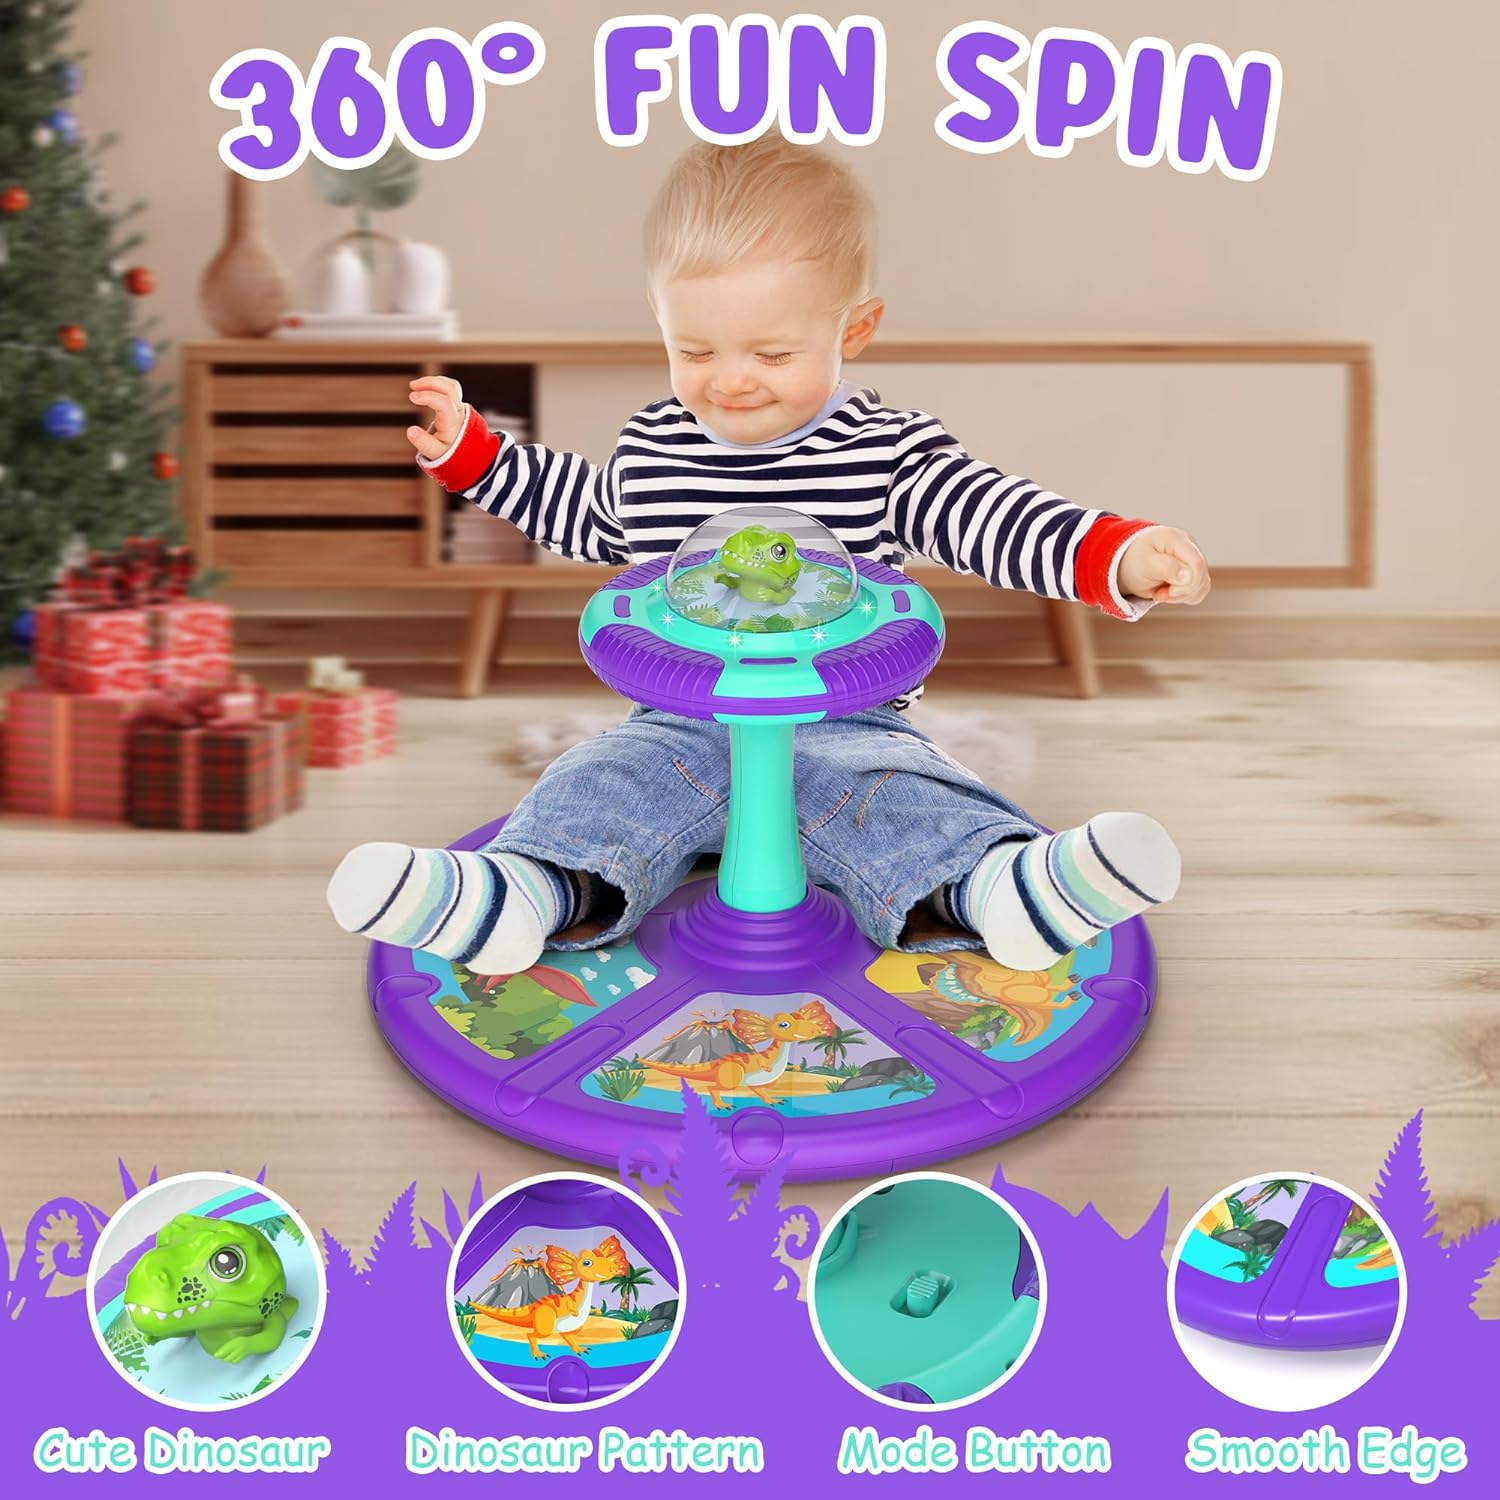 Dinosaur Sit and Spin Toddler Toys, 360° Spin Activity Toys with Music & LED Lights for Ages 1-3 Years Kids, Indoor Outdoor Early Development Toys & Birthday Gift for Boys Girls 18 Months +